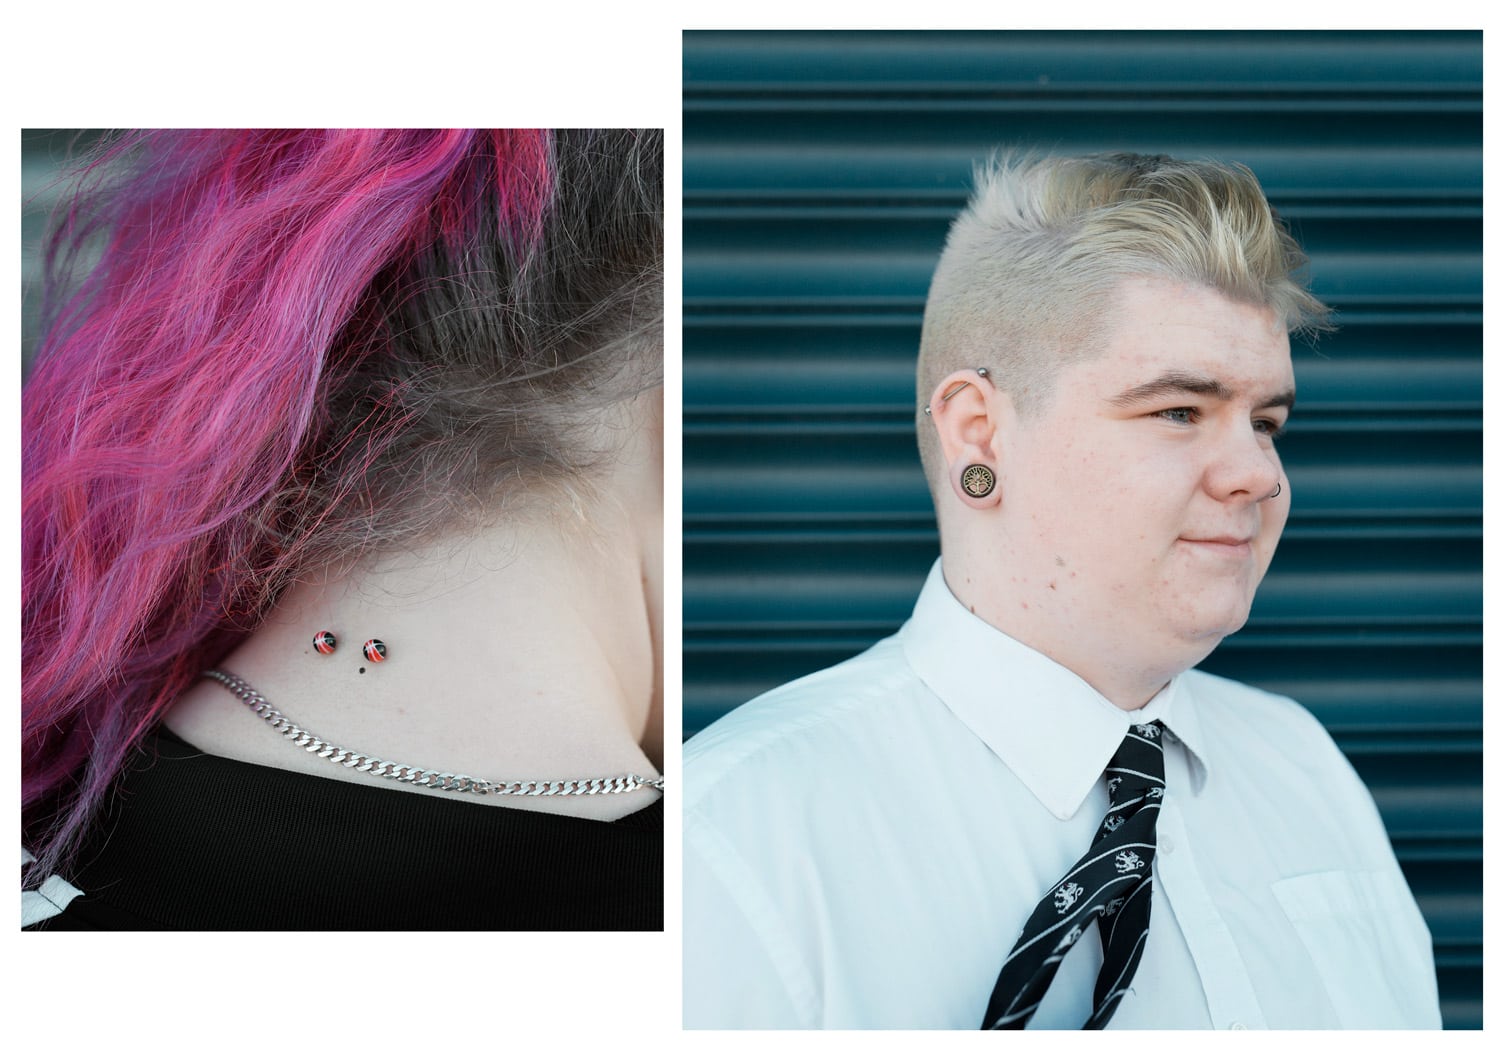 Teenagers in South Wales photographed for the Guardian to accompany a story by Steven Morris regarding the new laws recently implemented by the Welsh Government , banning intimate piercing for under 18s.